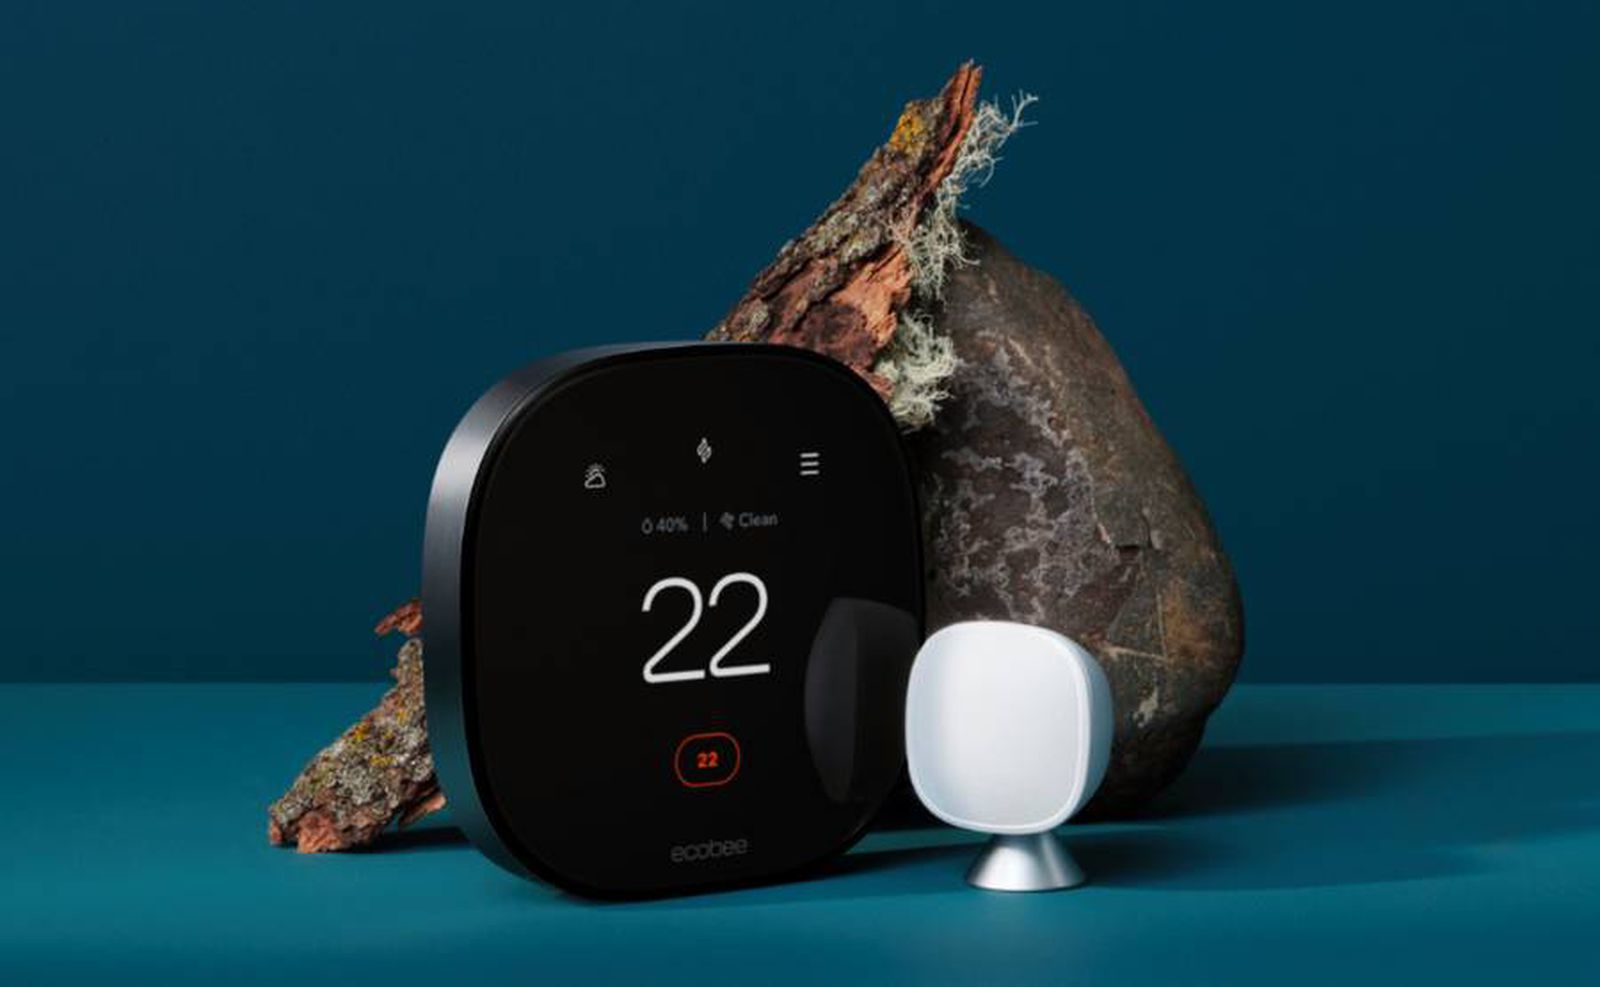 New Ecobee Smart Thermostat With Premium Design Revealed Ahead of Launch, Suppor..